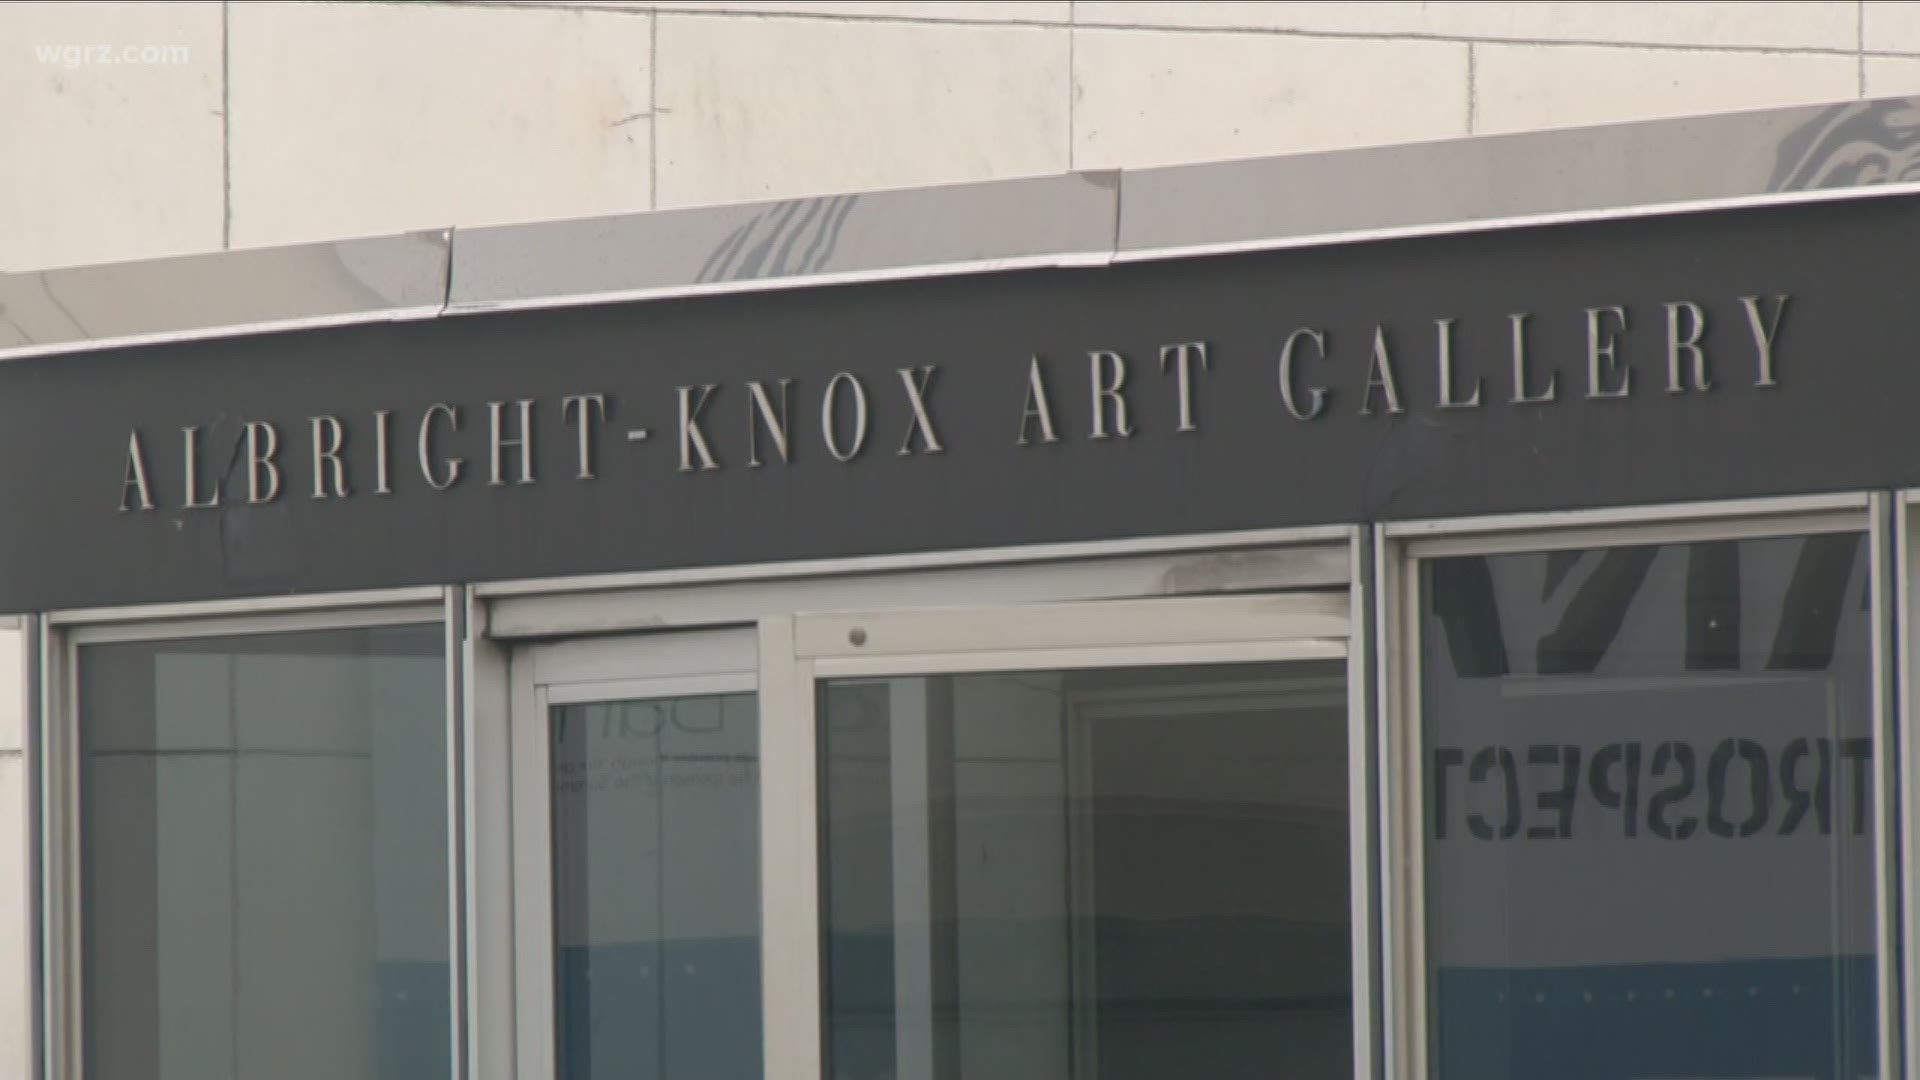 Albright-Knox Plans To Add Third Building